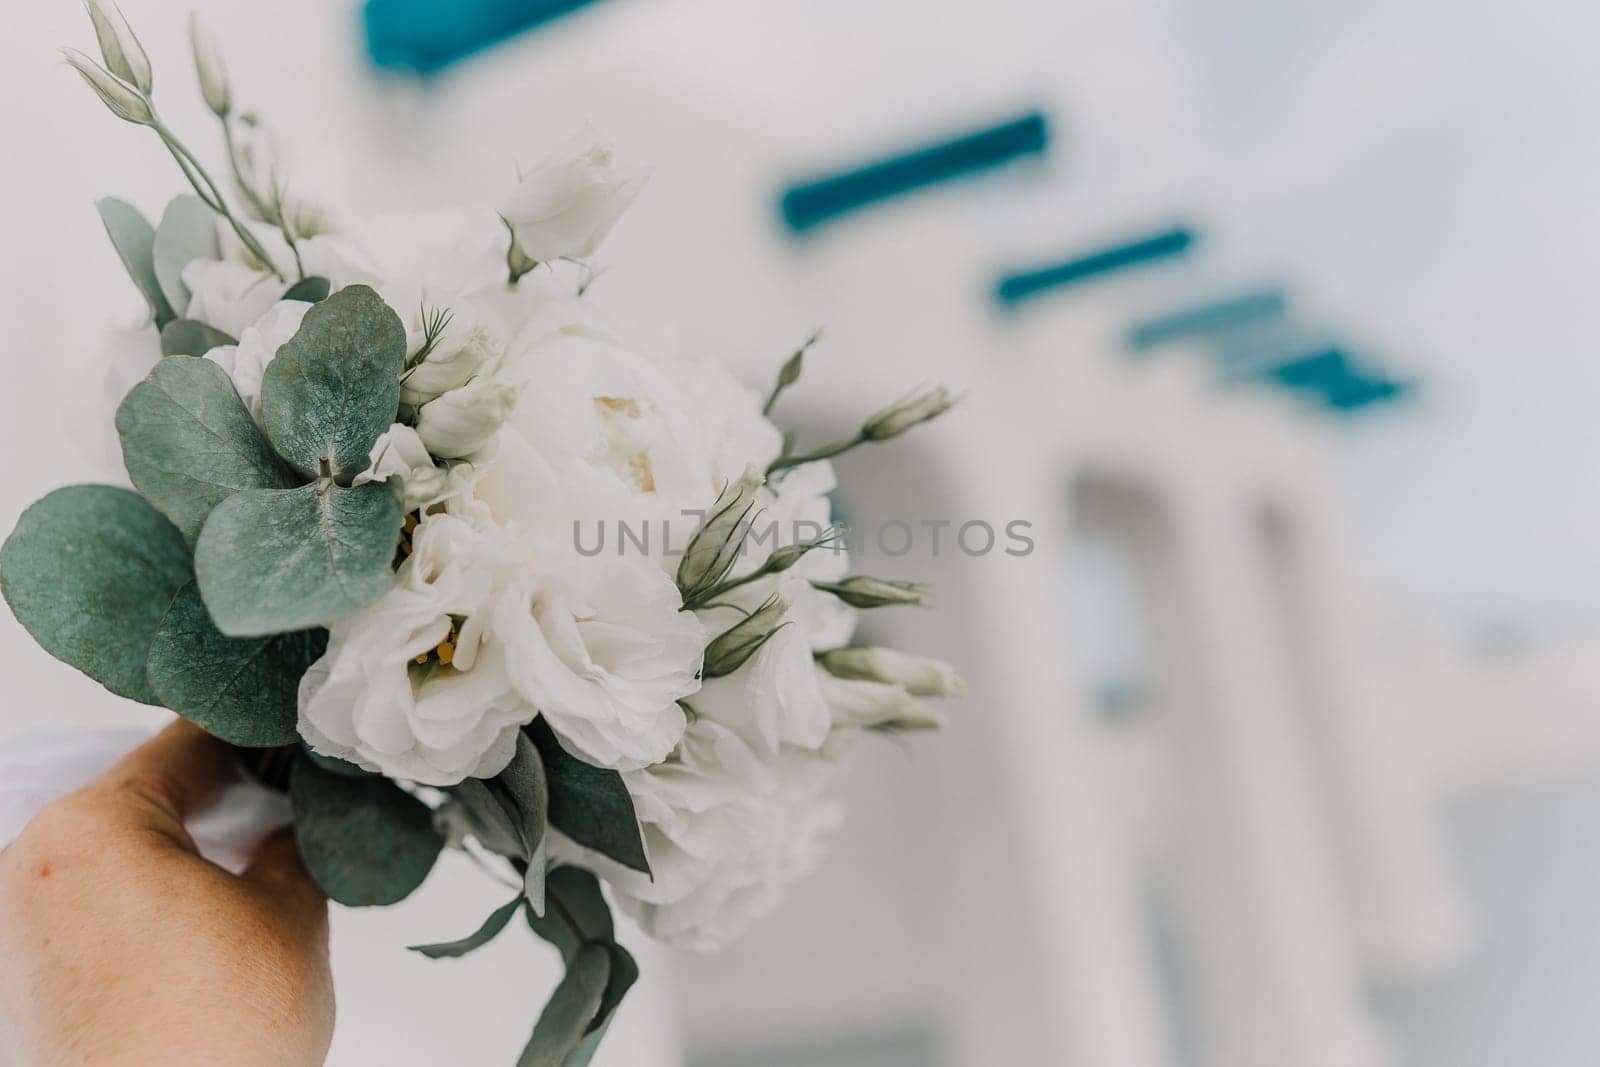 A bouquet of white flowers is being held by a person. The flowers are arranged in a way that they are not too close to each other, giving the impression of a beautiful and elegant arrangement. by Matiunina